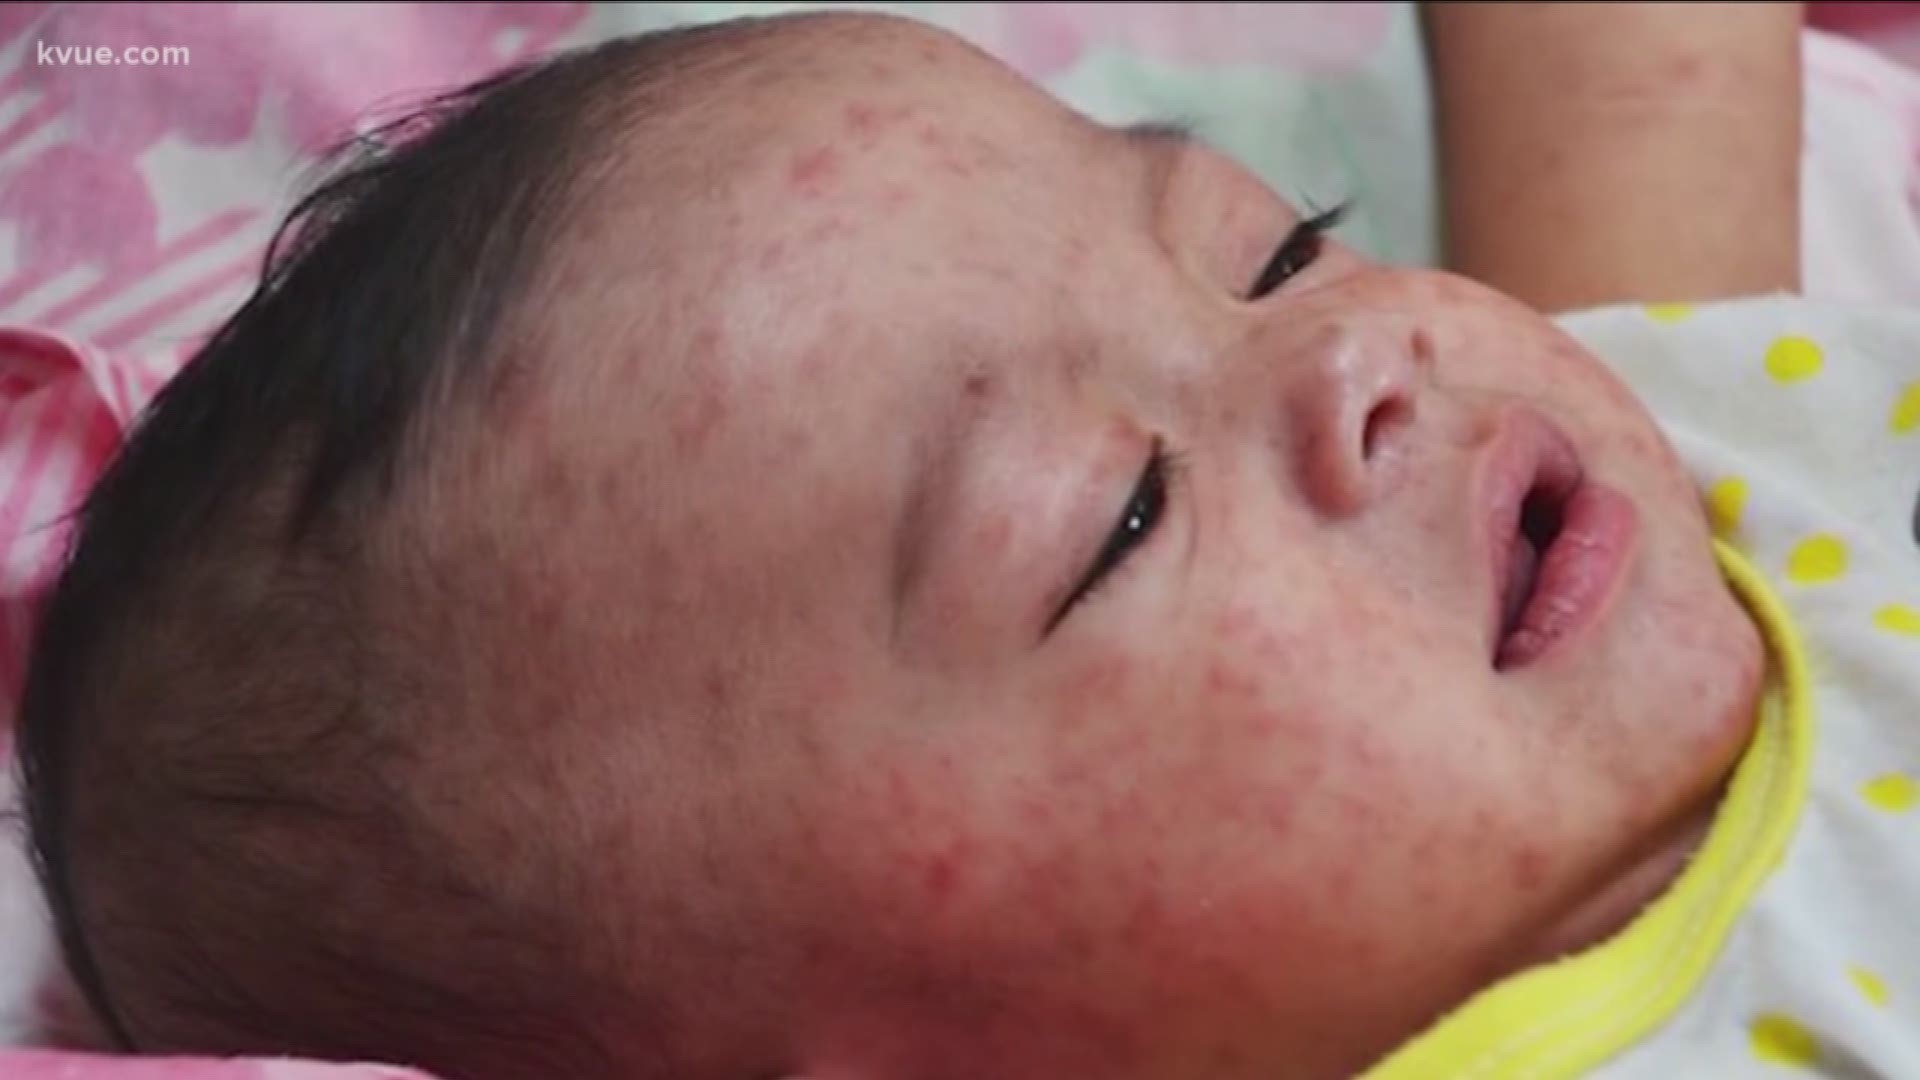 It looks like the measles have made their way to Central Texas. The state health department said there are two possible cases in the region now.